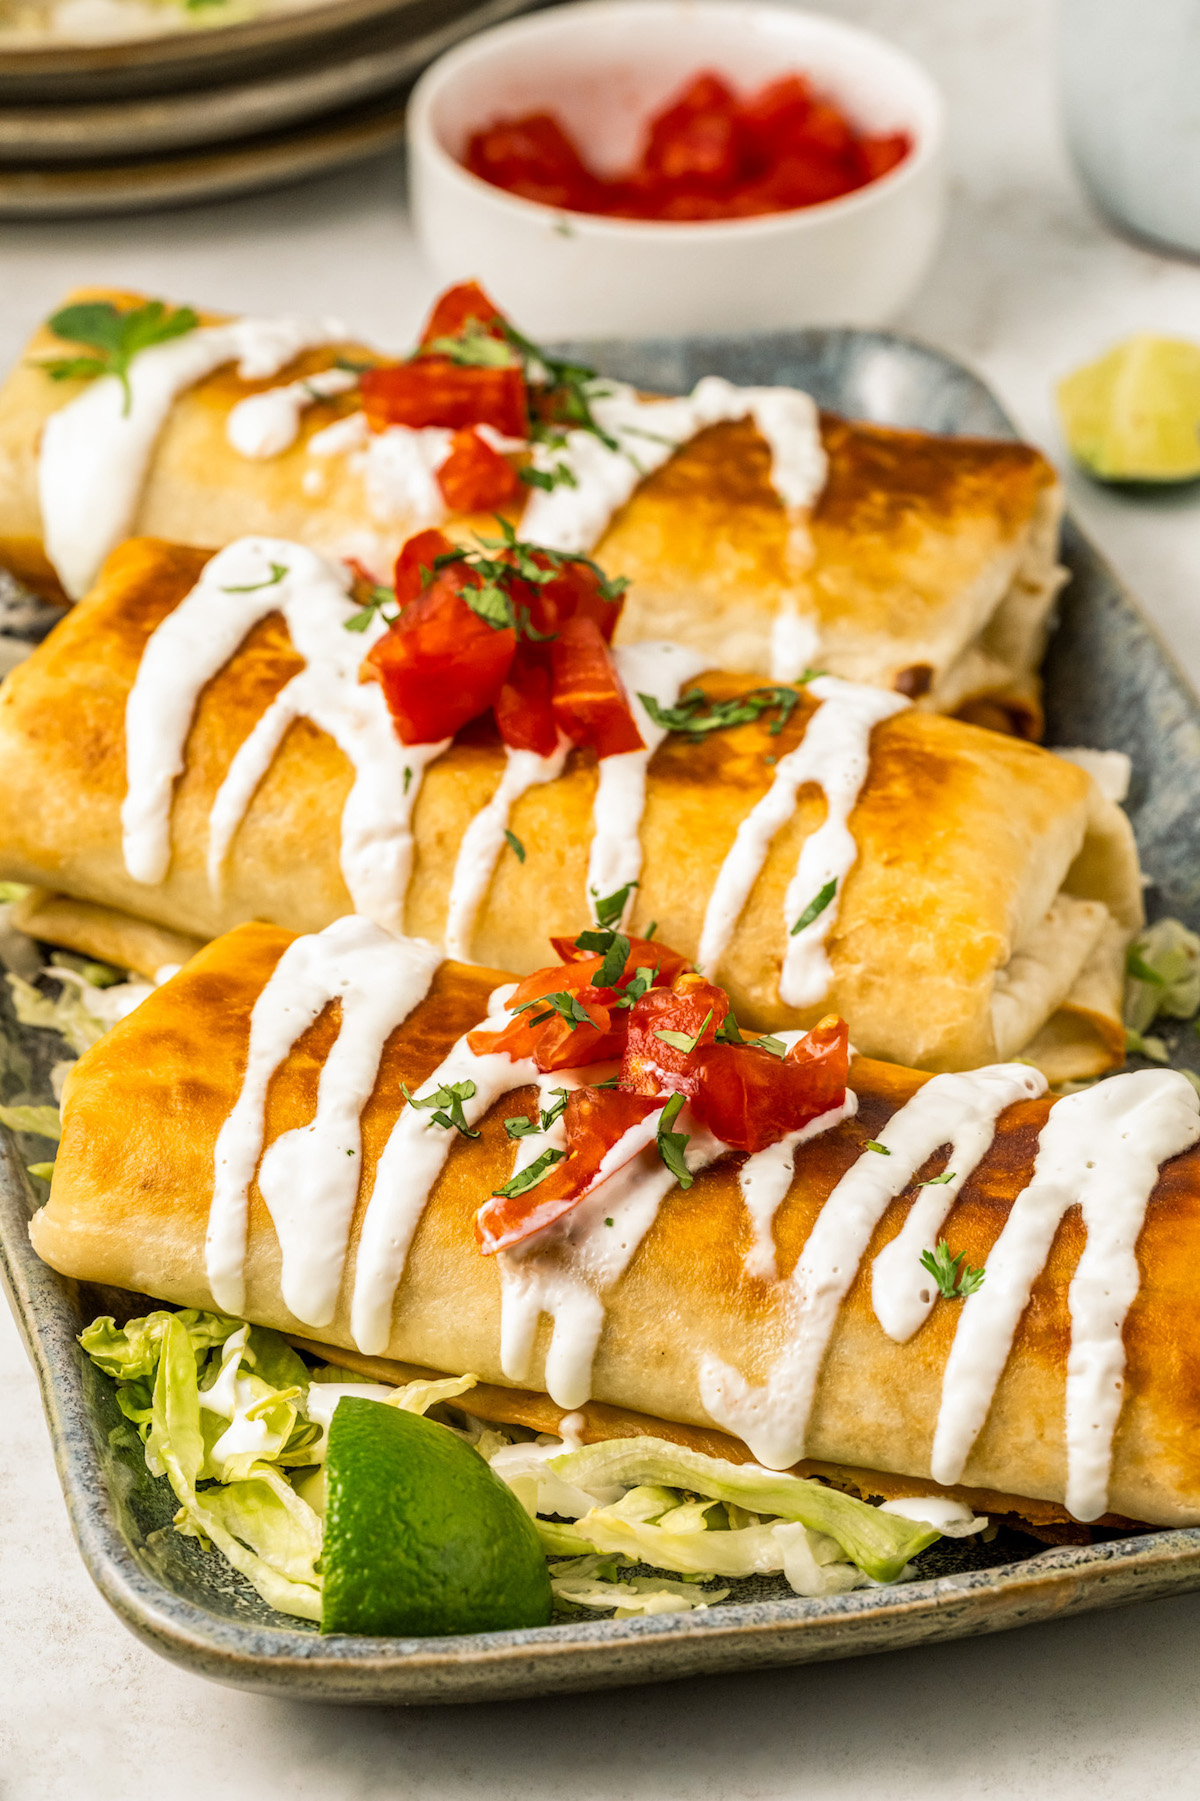 Three crispy, golden brown chimichangas topped with with pico de gallo and Mexican crema. 